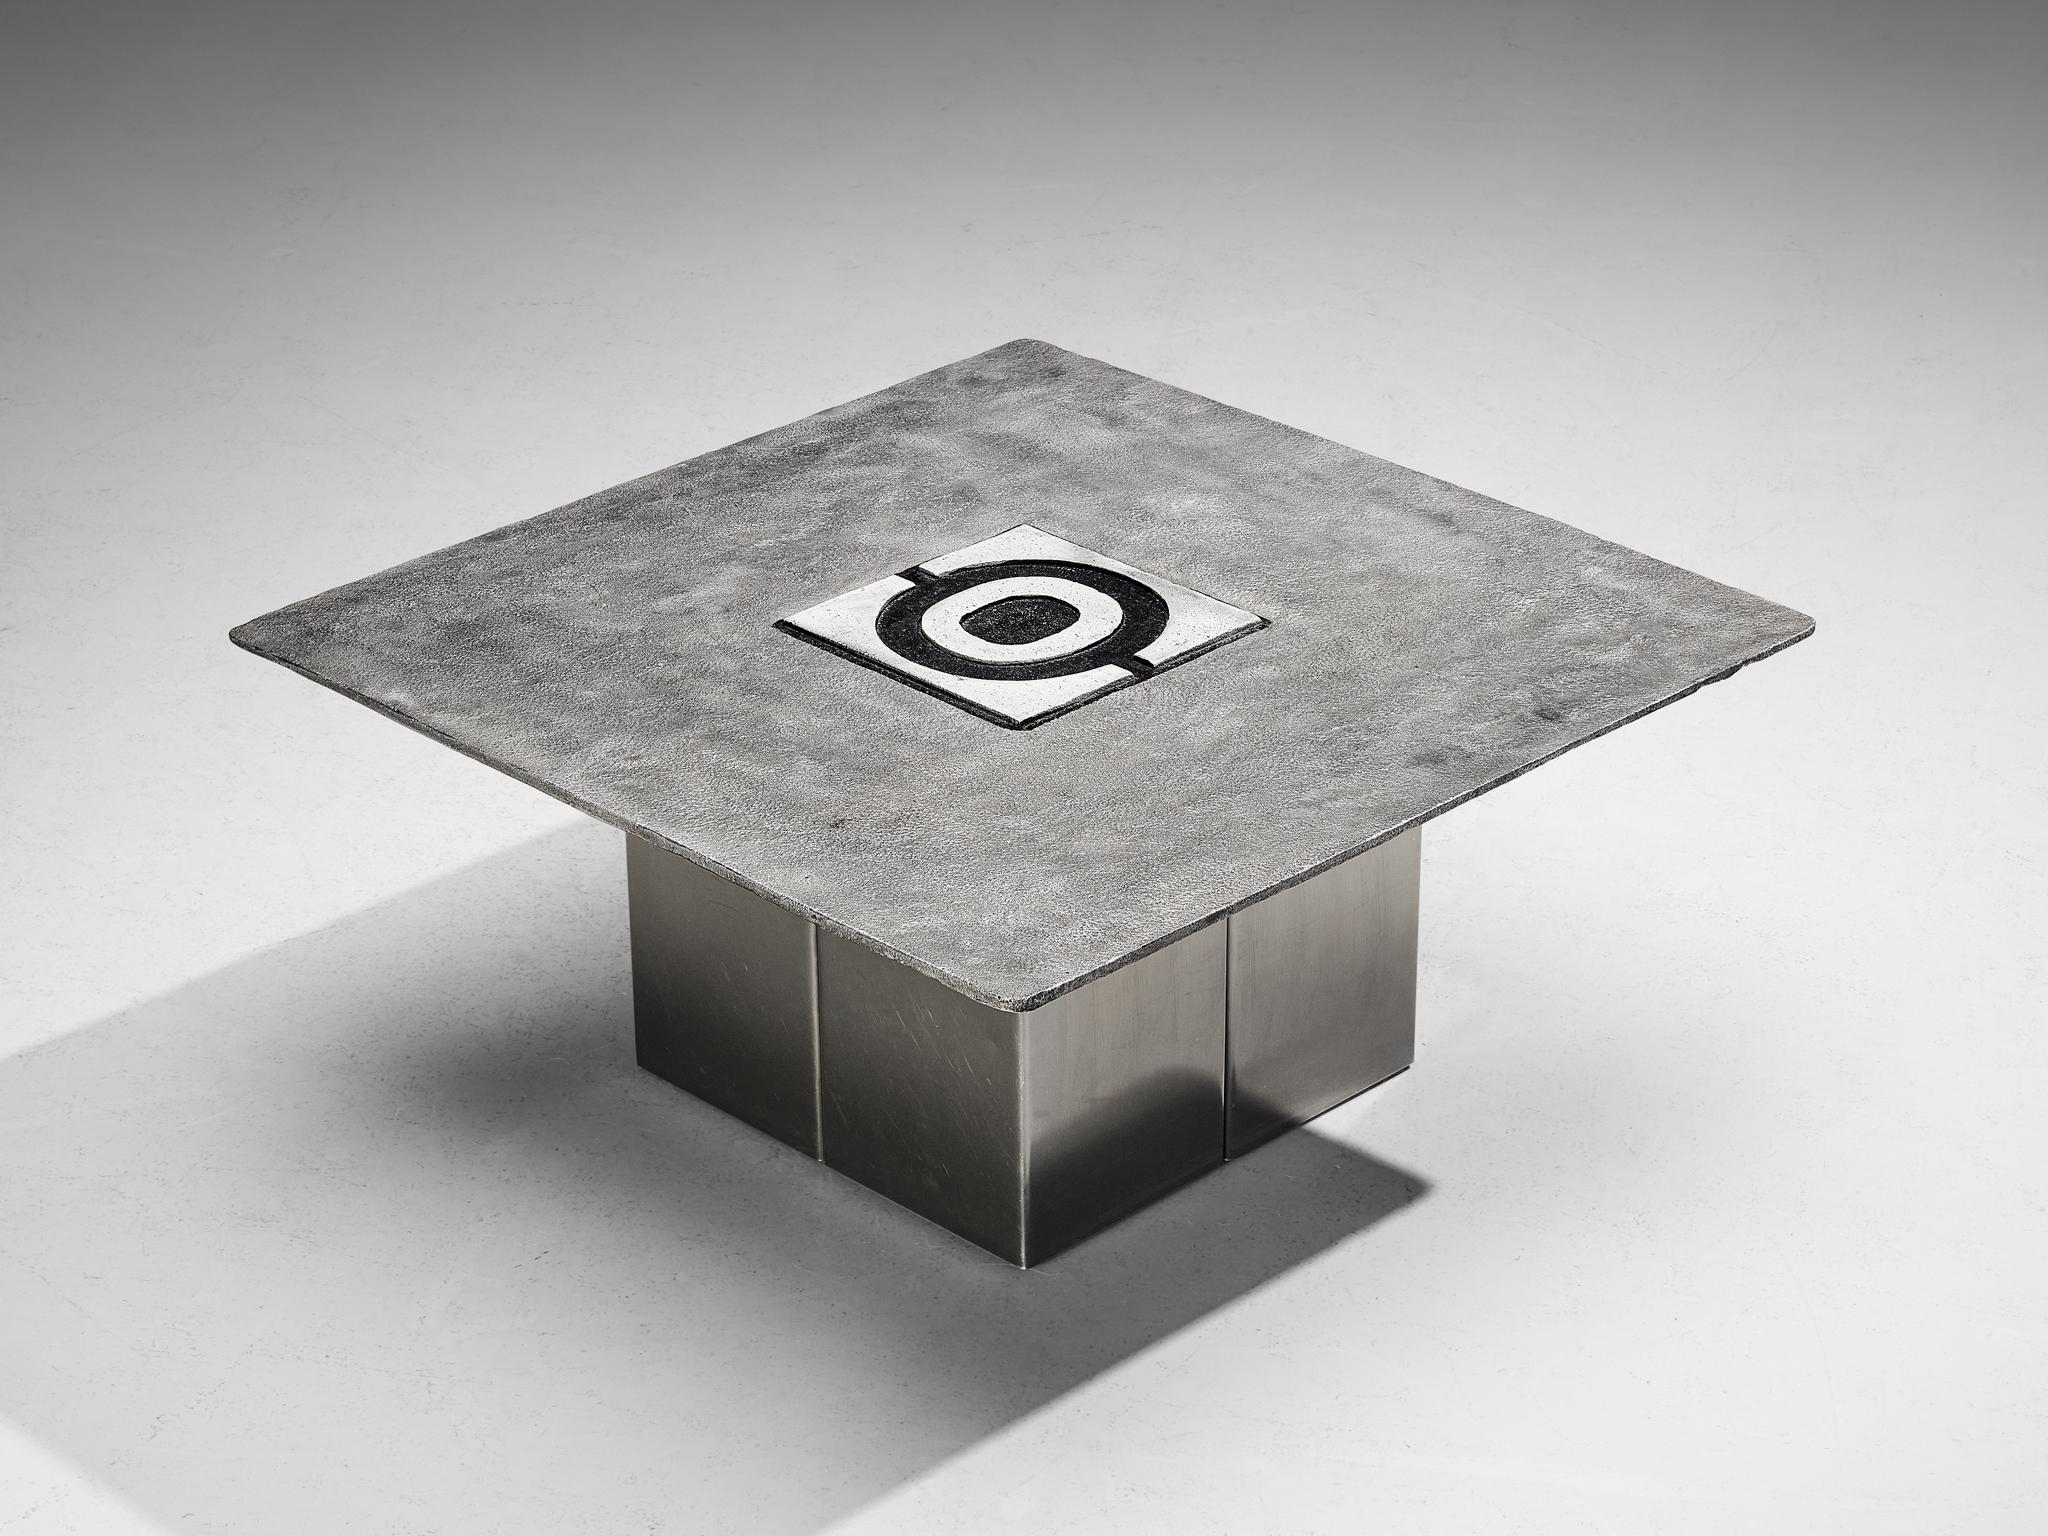 Willy Ceysens, coffee table, cast aluminium, stainless steel, Belgium, 1970s

Alluring coffee table designed by Willy Ceysens. This remarkable item is a true eye catcher with its outstanding cast aluminium exterior. The silver square tabletop with